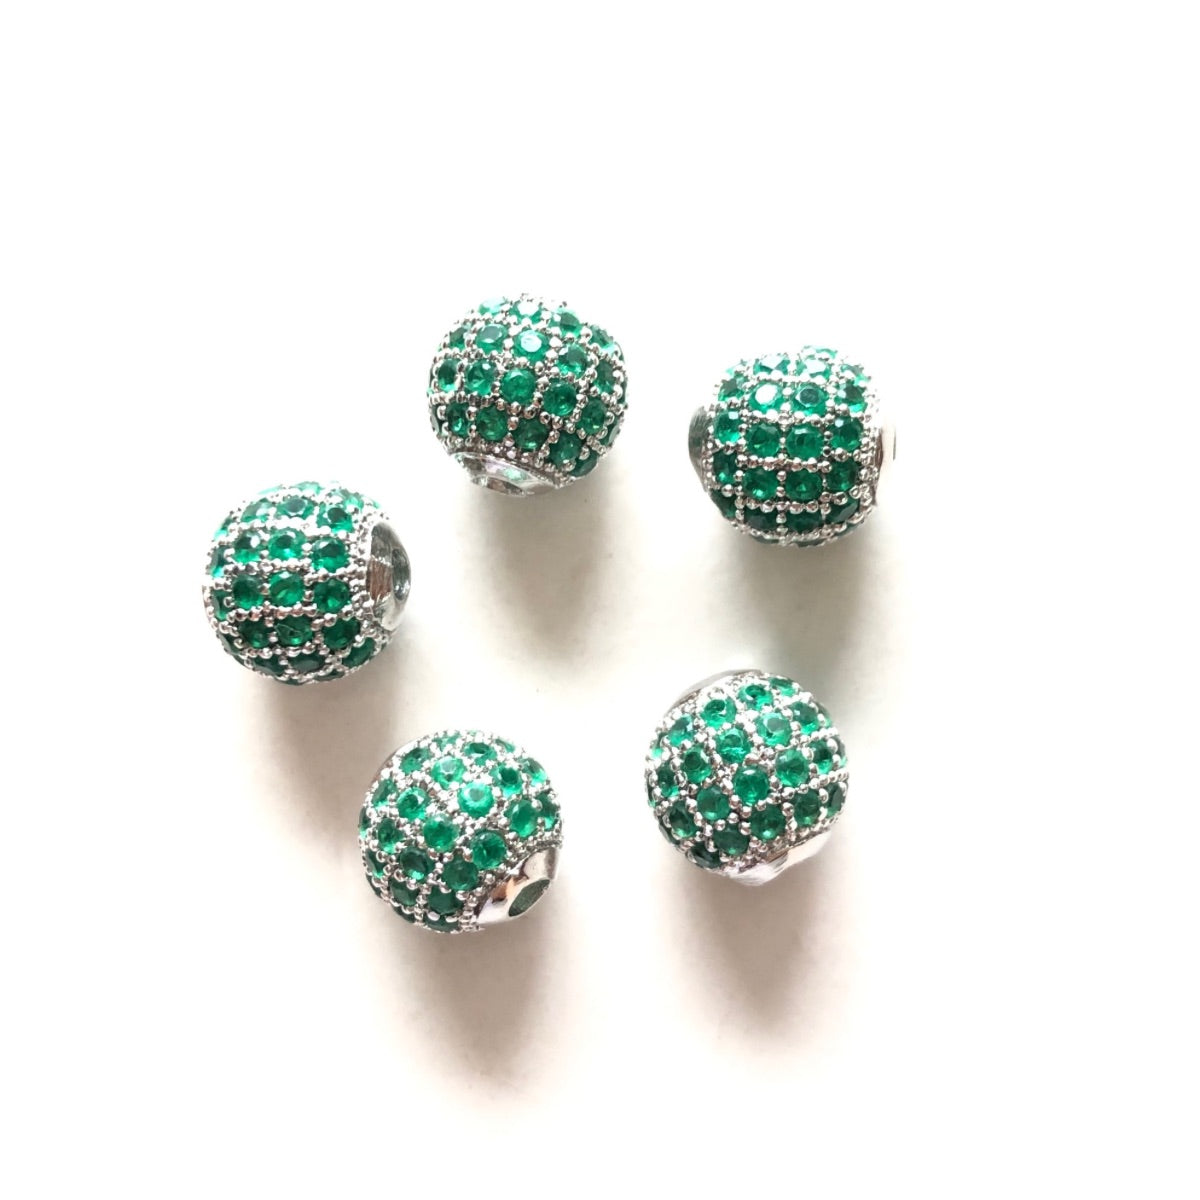 10pcs/lot 6mm, 8mm Colorful CZ Paved Ball Spacers Silver Green CZ Paved Spacers 6mm Beads 8mm Beads Ball Beads Colorful Zirconia New Spacers Arrivals Charms Beads Beyond